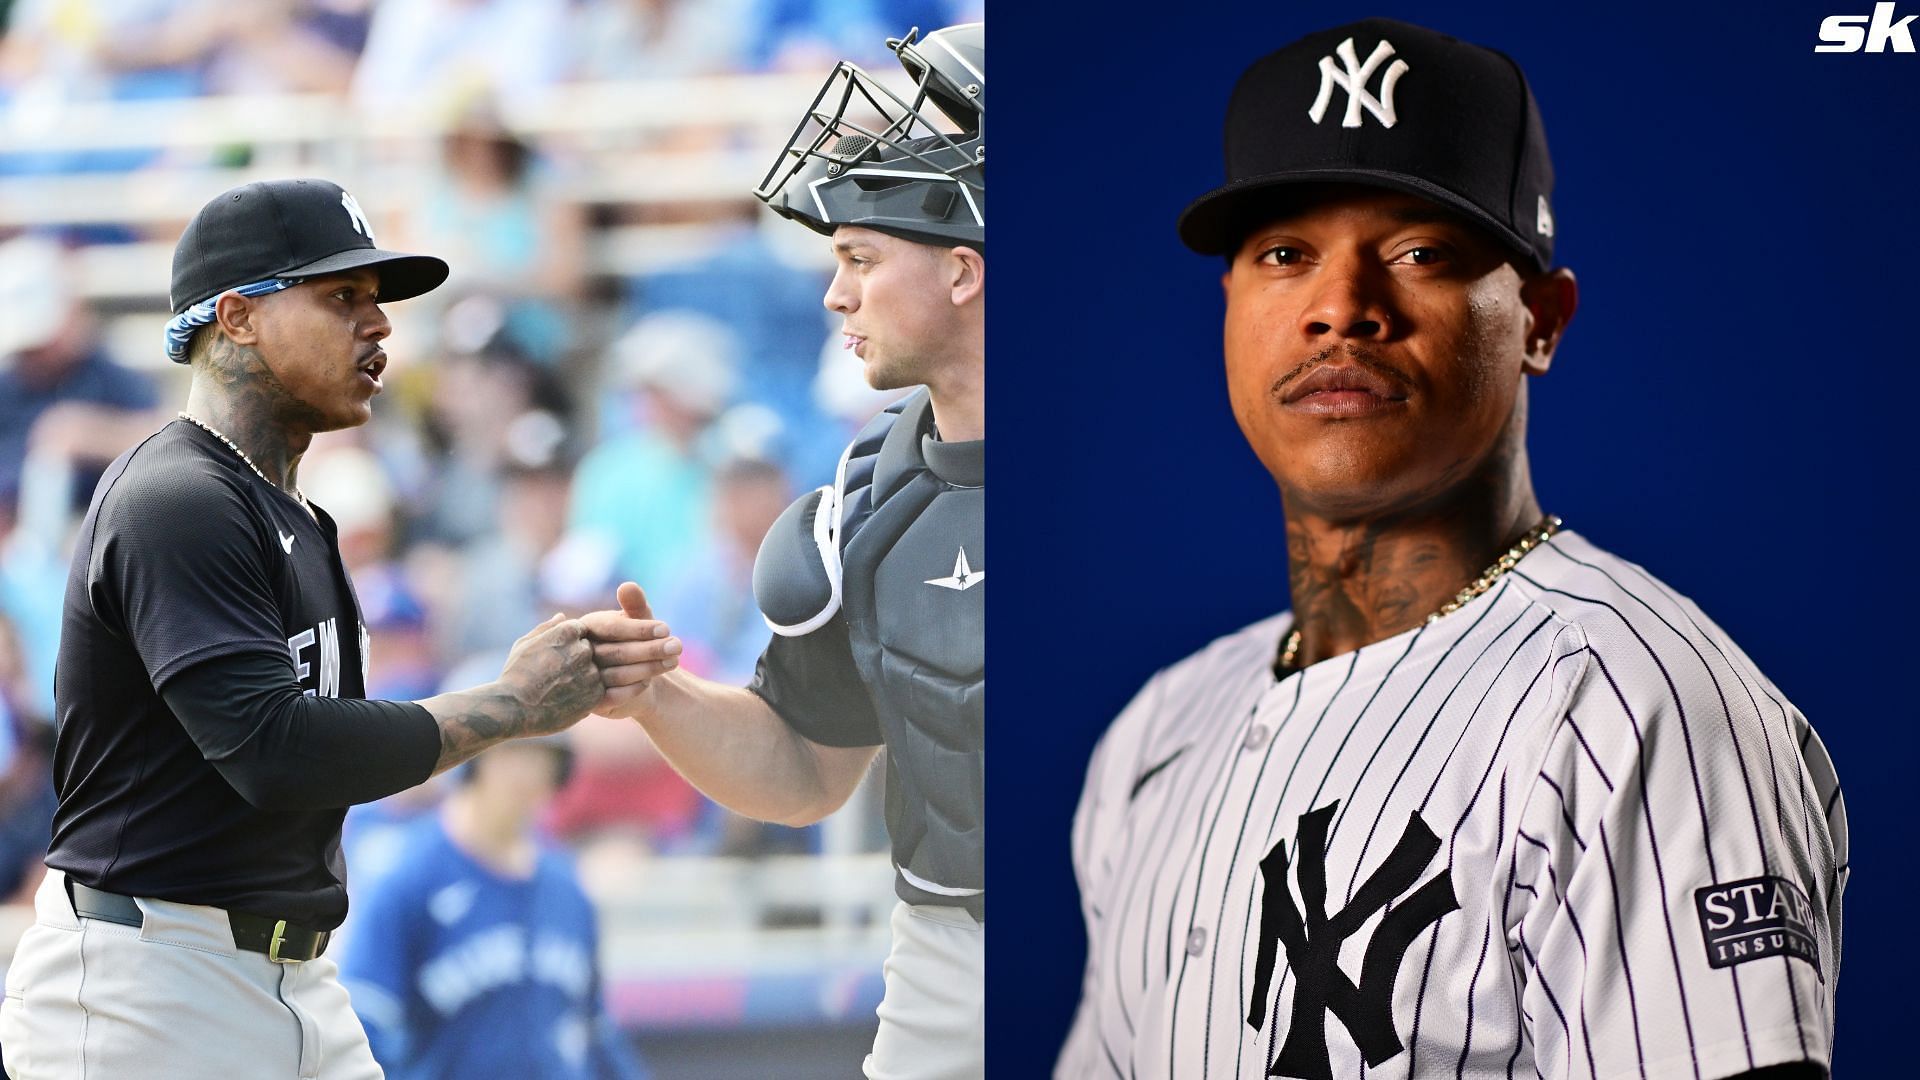 Marcus Stroman and Ben Rortvedt of the New York Yankees react following the first inning against the Toronto Blue Jays during a Spring Training game at TD Ballpark